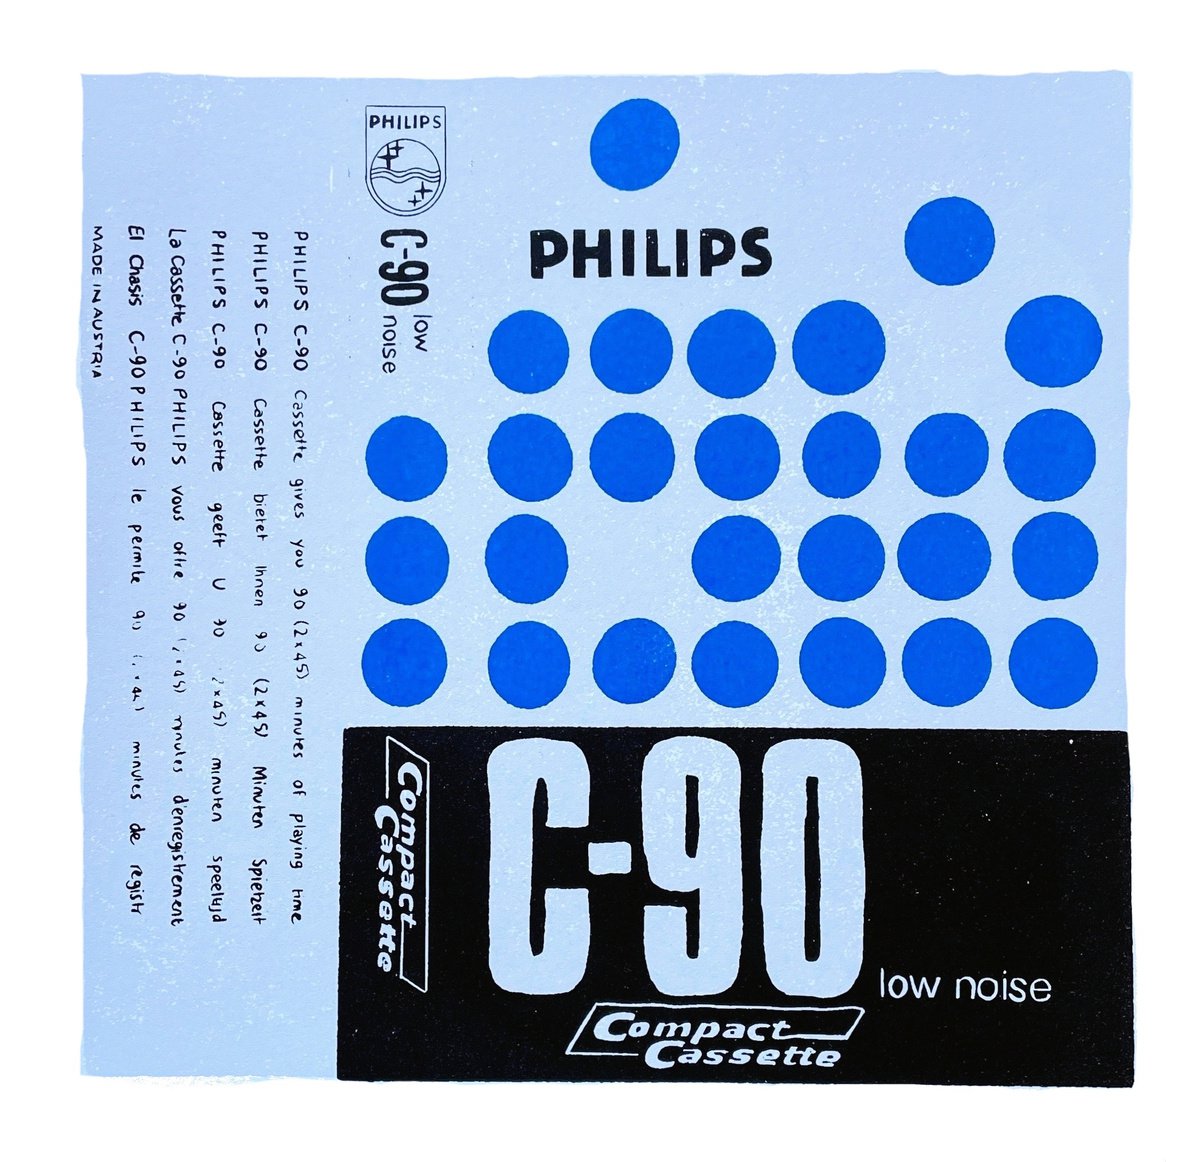 PHILLIPS C90 - Limited-edition, Screen Print by Design Smith